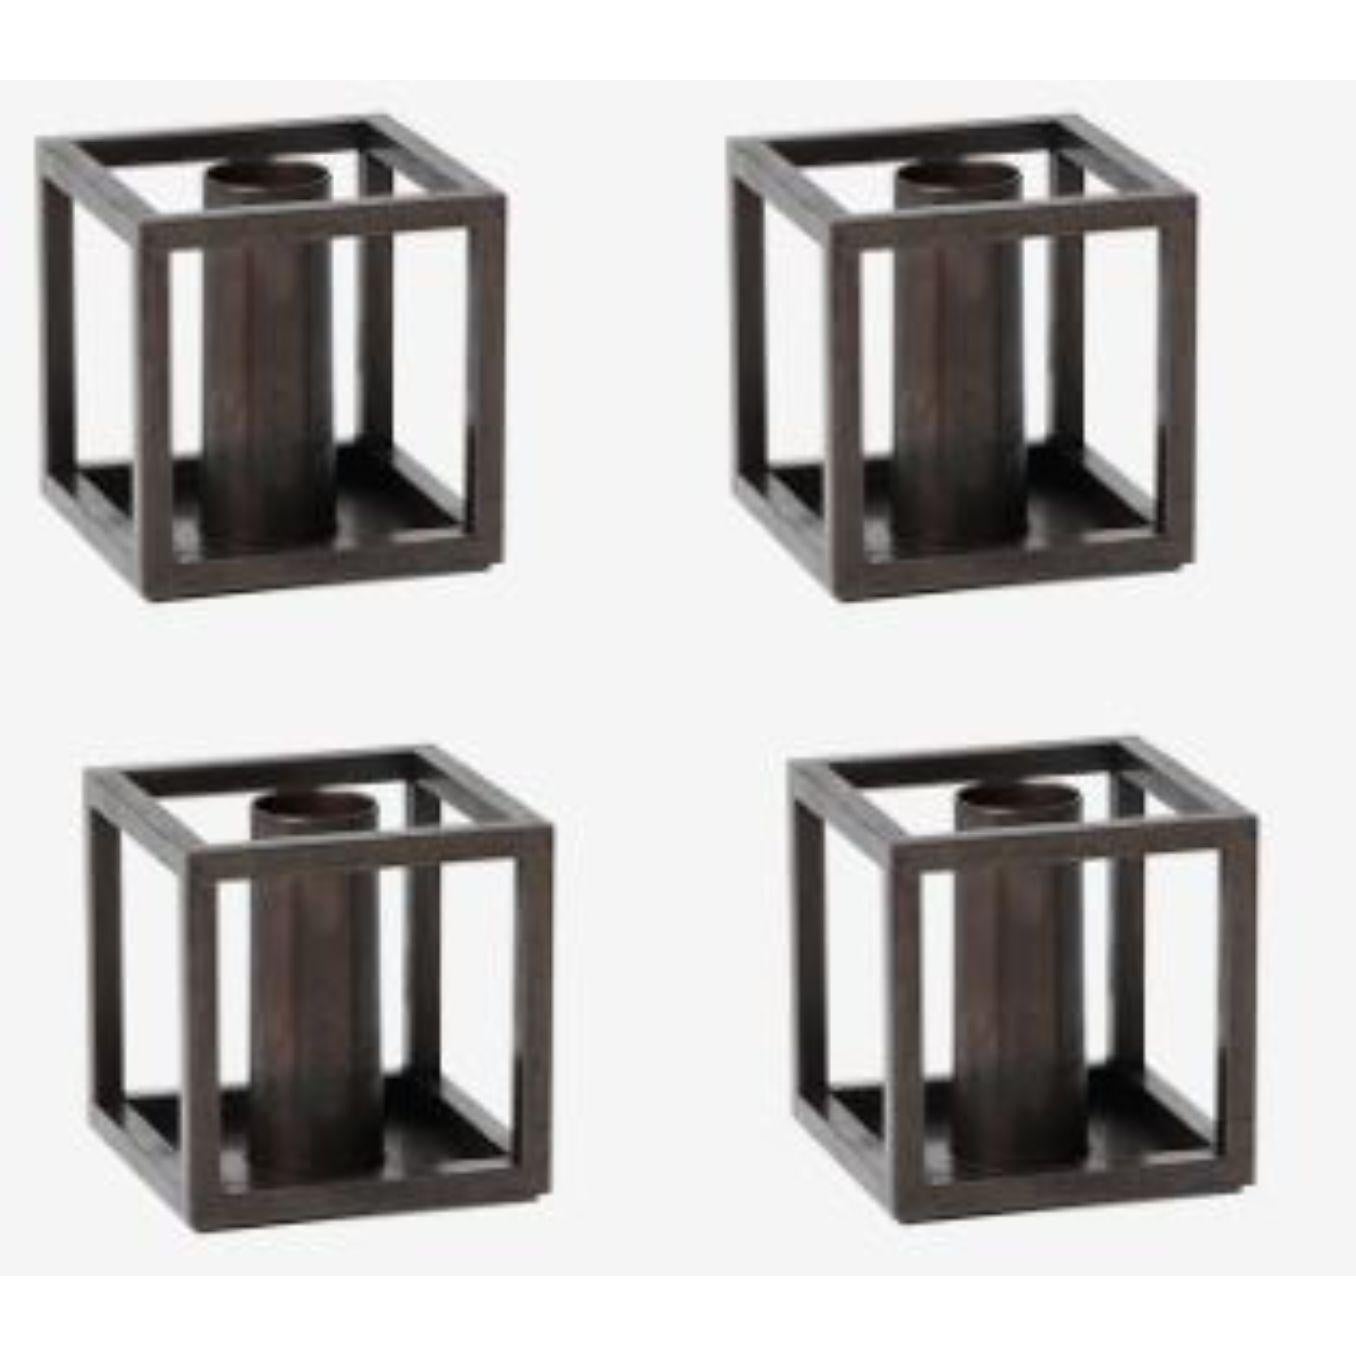 Set of 4 Burnished copper Kubus 1 candle holders by Lassen
Dimensions: D 7 x W 7 x H 7 cm 
Materials: Metal 
Also available in different dimensions.
Weight: 0.40 Kg

A new small wonder has seen the light of day. Kubus Micro is a stylish,